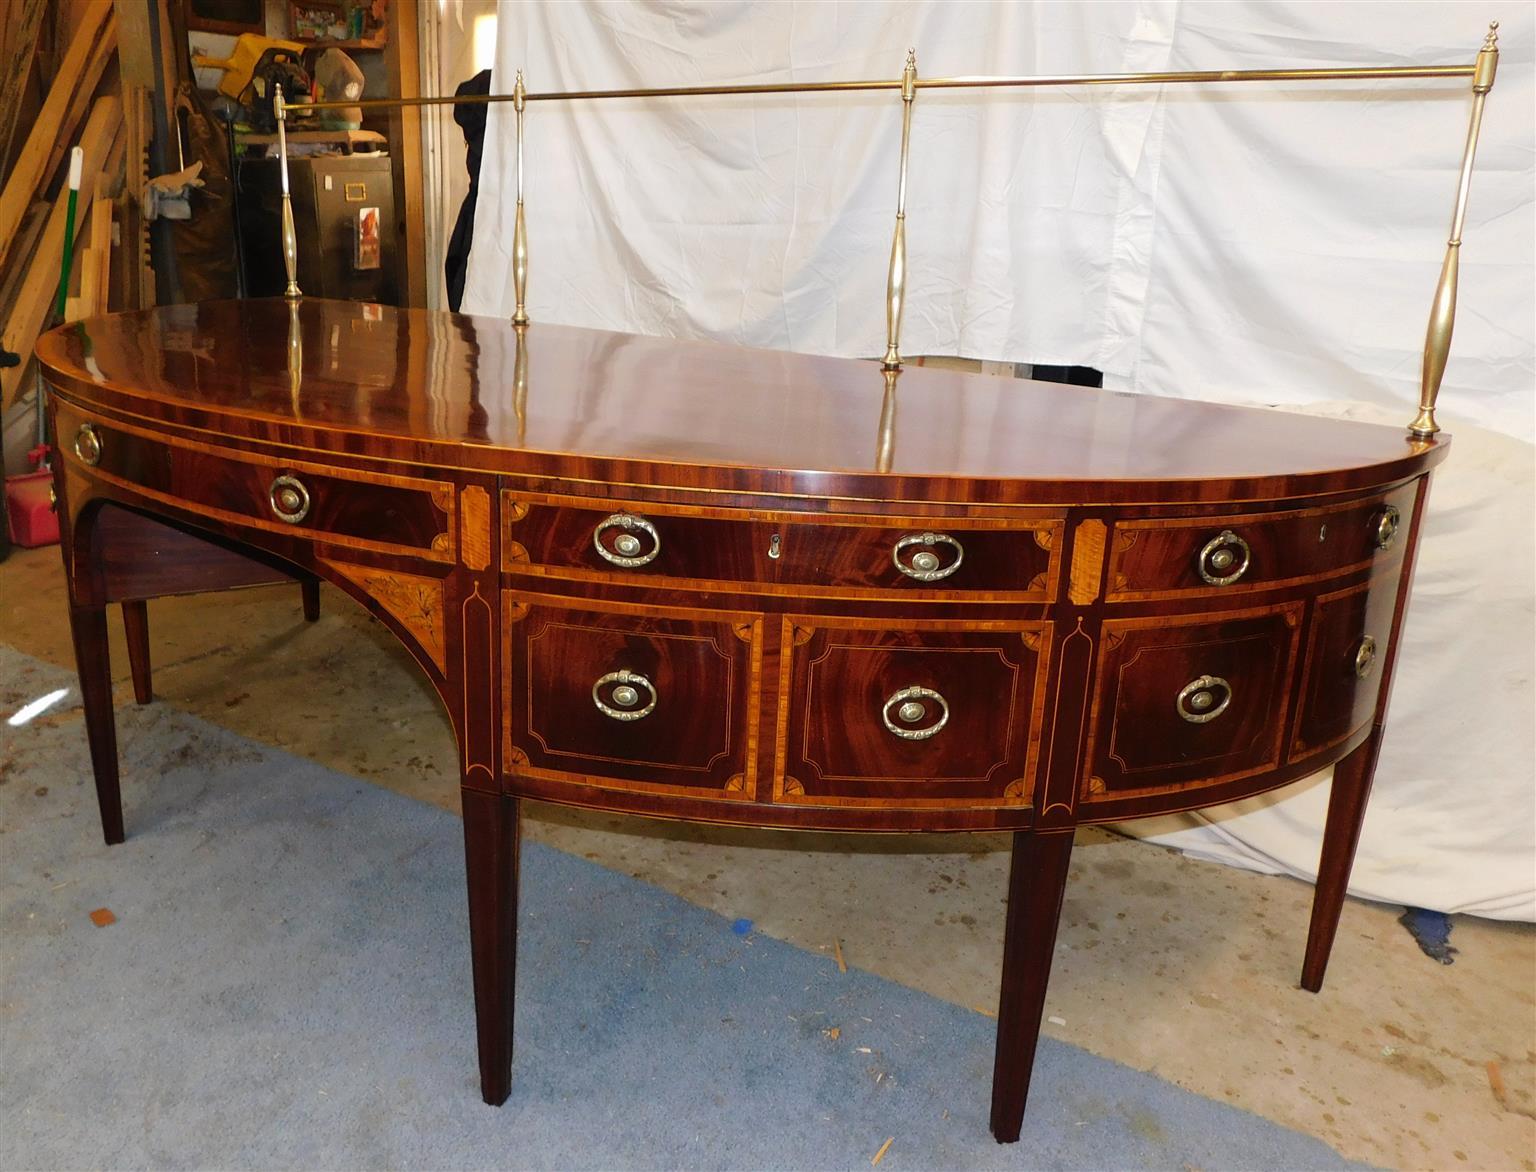 English Hepplewhite Mahogany Patera Inlaid Sideboard with Brass Gallery, C. 1770 For Sale 6